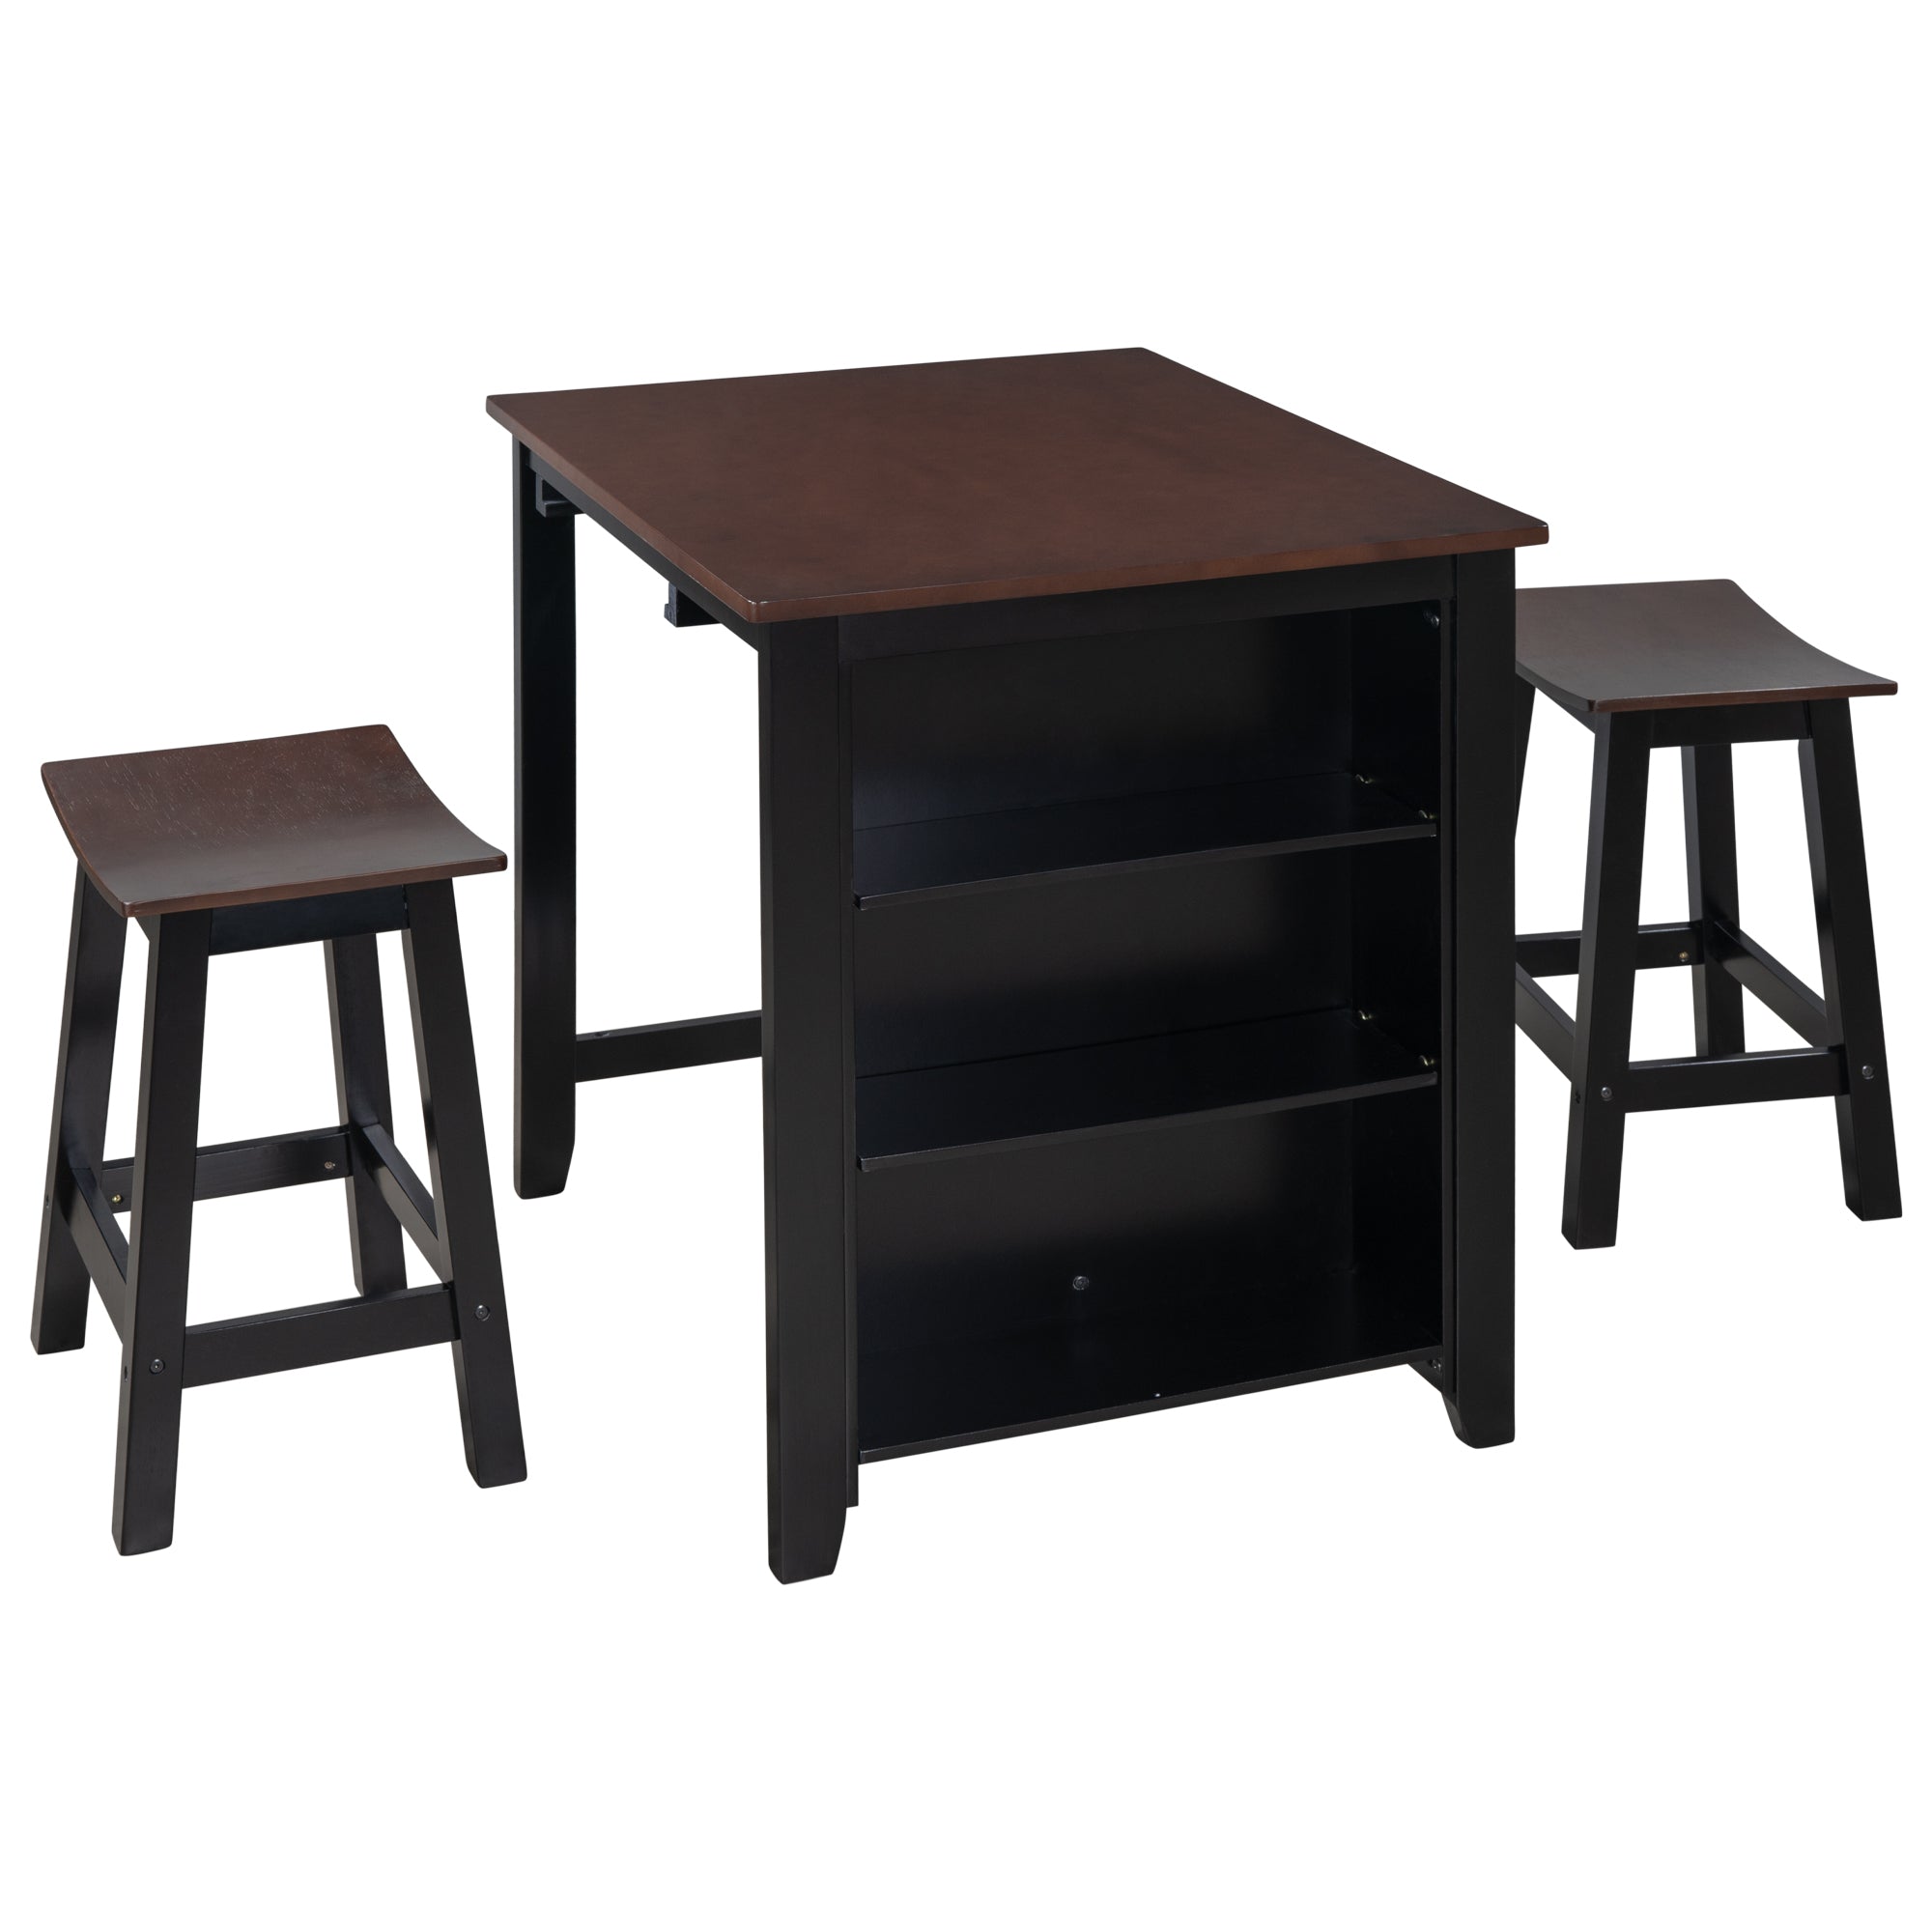 Wood 3-Piece Counter Height Dining Kitchen Set with 2 Suspensible Stools, 3-tier Storage for Small Places, Cherry+Black